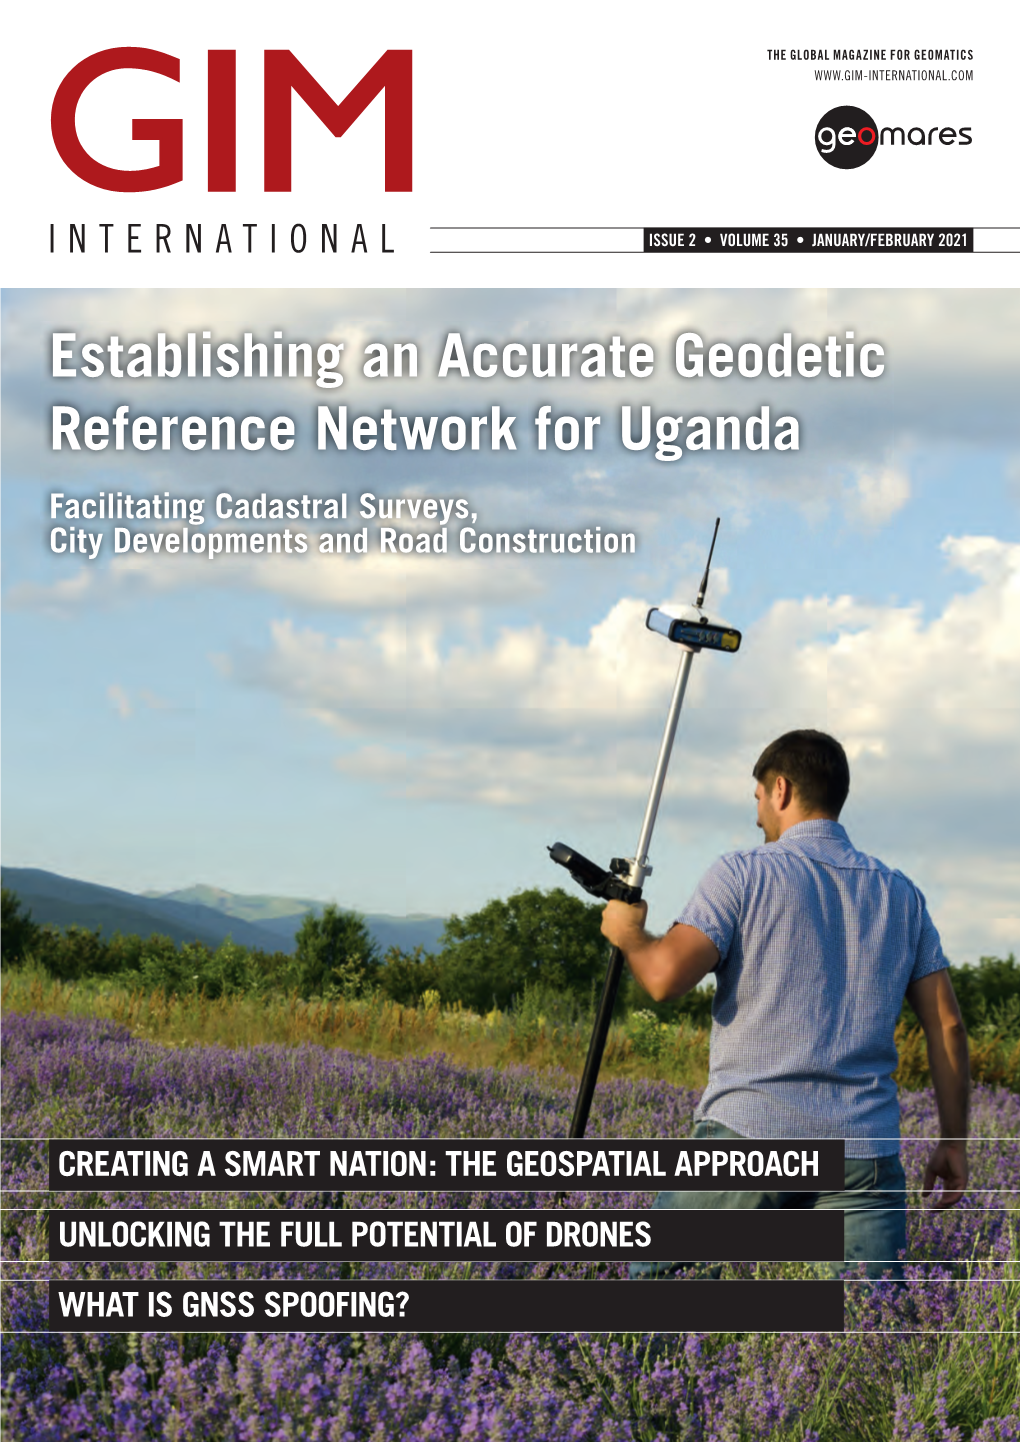 Establishing an Accurate Geodetic Reference Network for Uganda Facilitating Cadastral Surveys, City Developments and Road Construction